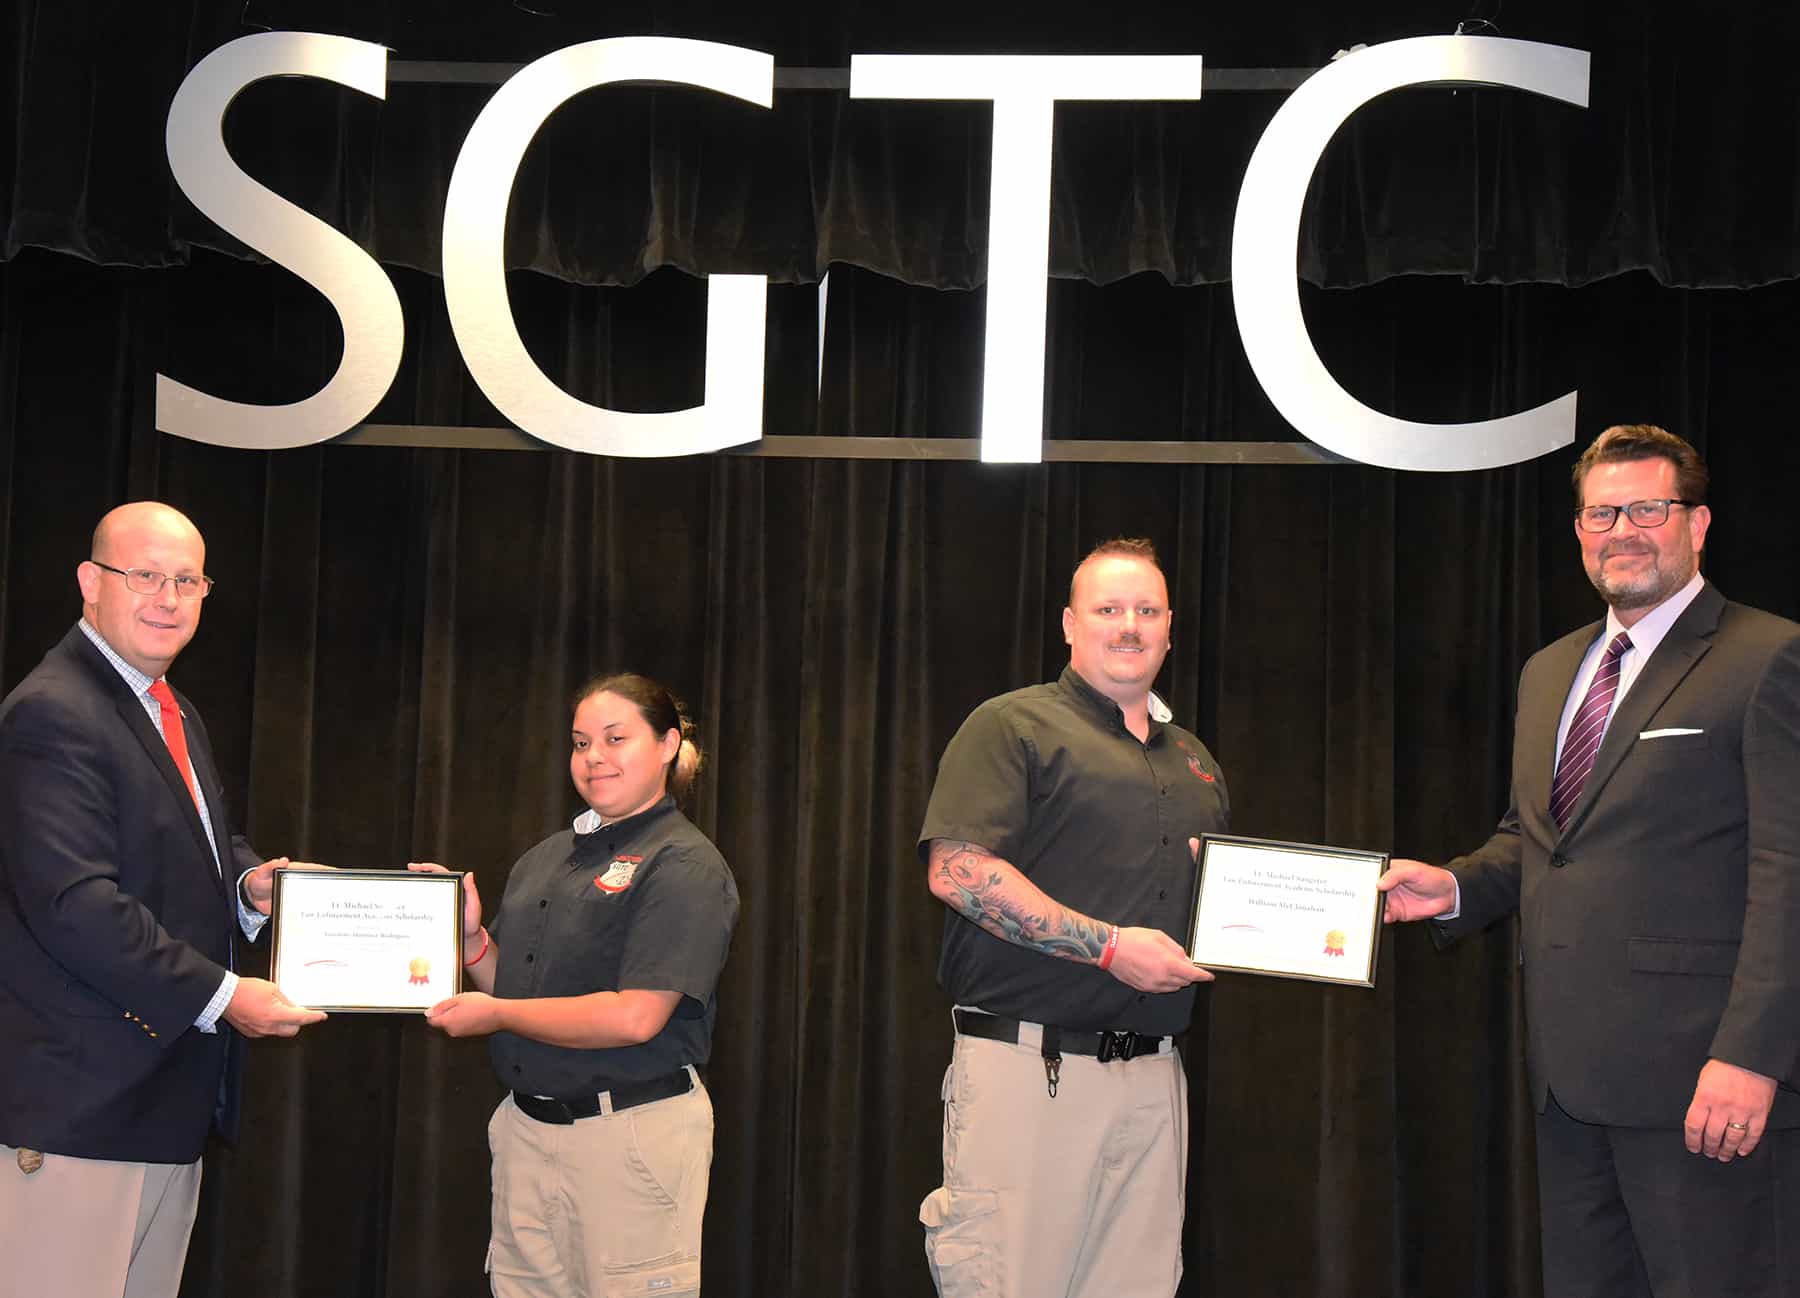 South Georgia Technical College Law Enforcement Academy Director Brett Murray is shown above presenting the Lt. Michael Sangster Law Enforcement Academy Scholarship to Yamilette Martinez-Rodriguez and William McClanahan is shown receiving his scholarship certificate from South Georgia Technical College President Dr. John Watford.